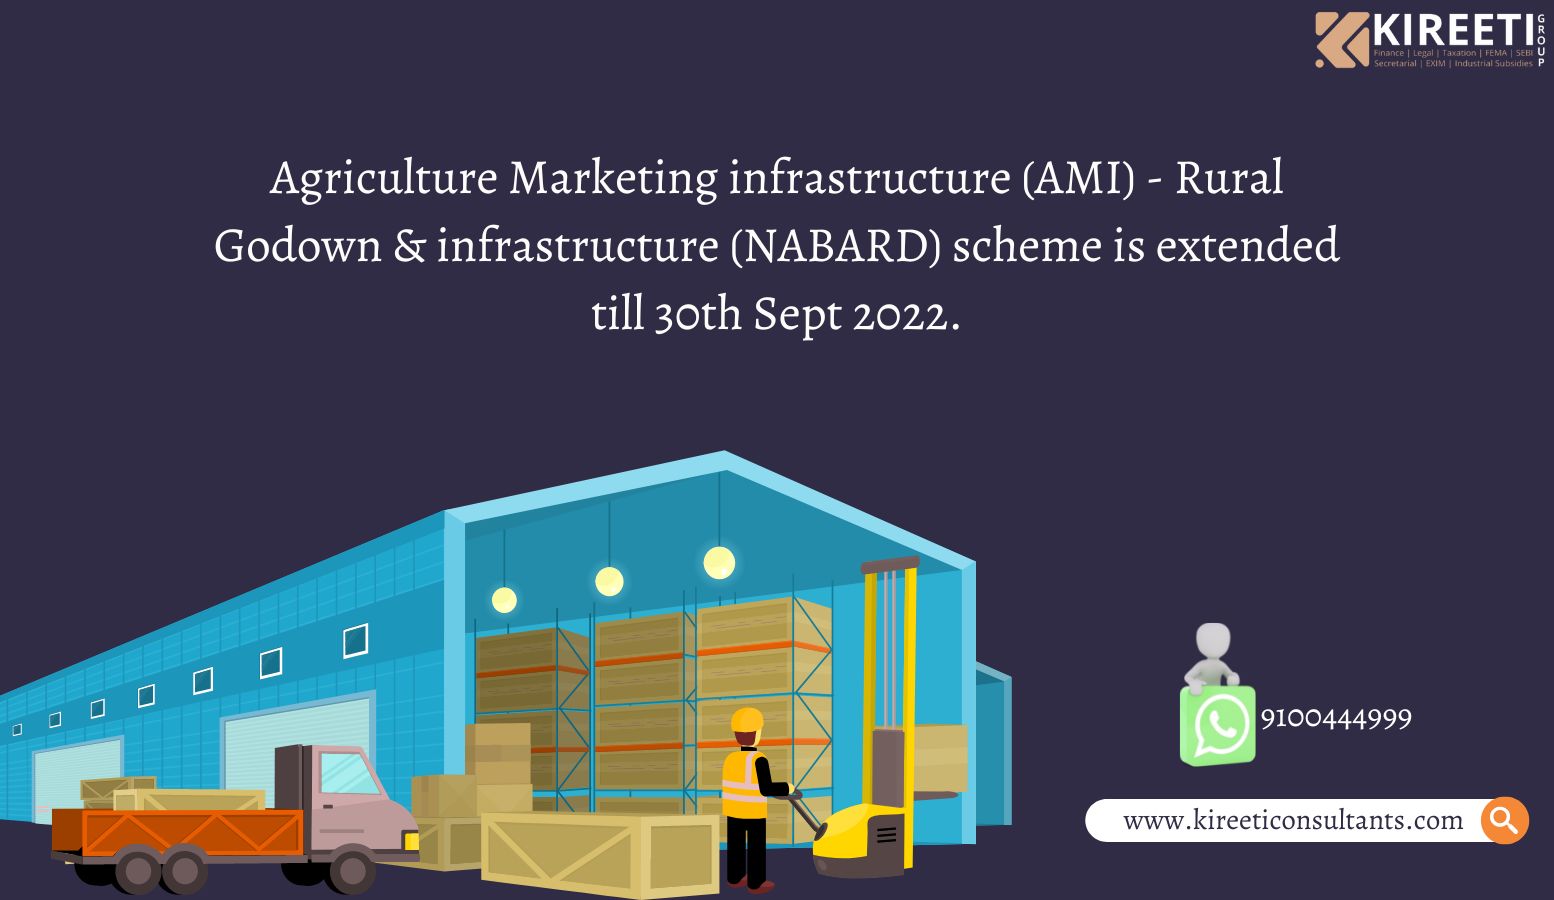 NABARAD, AMI, Agriculture Marketing Infrastructure, Rural Godown & Infrastructure,